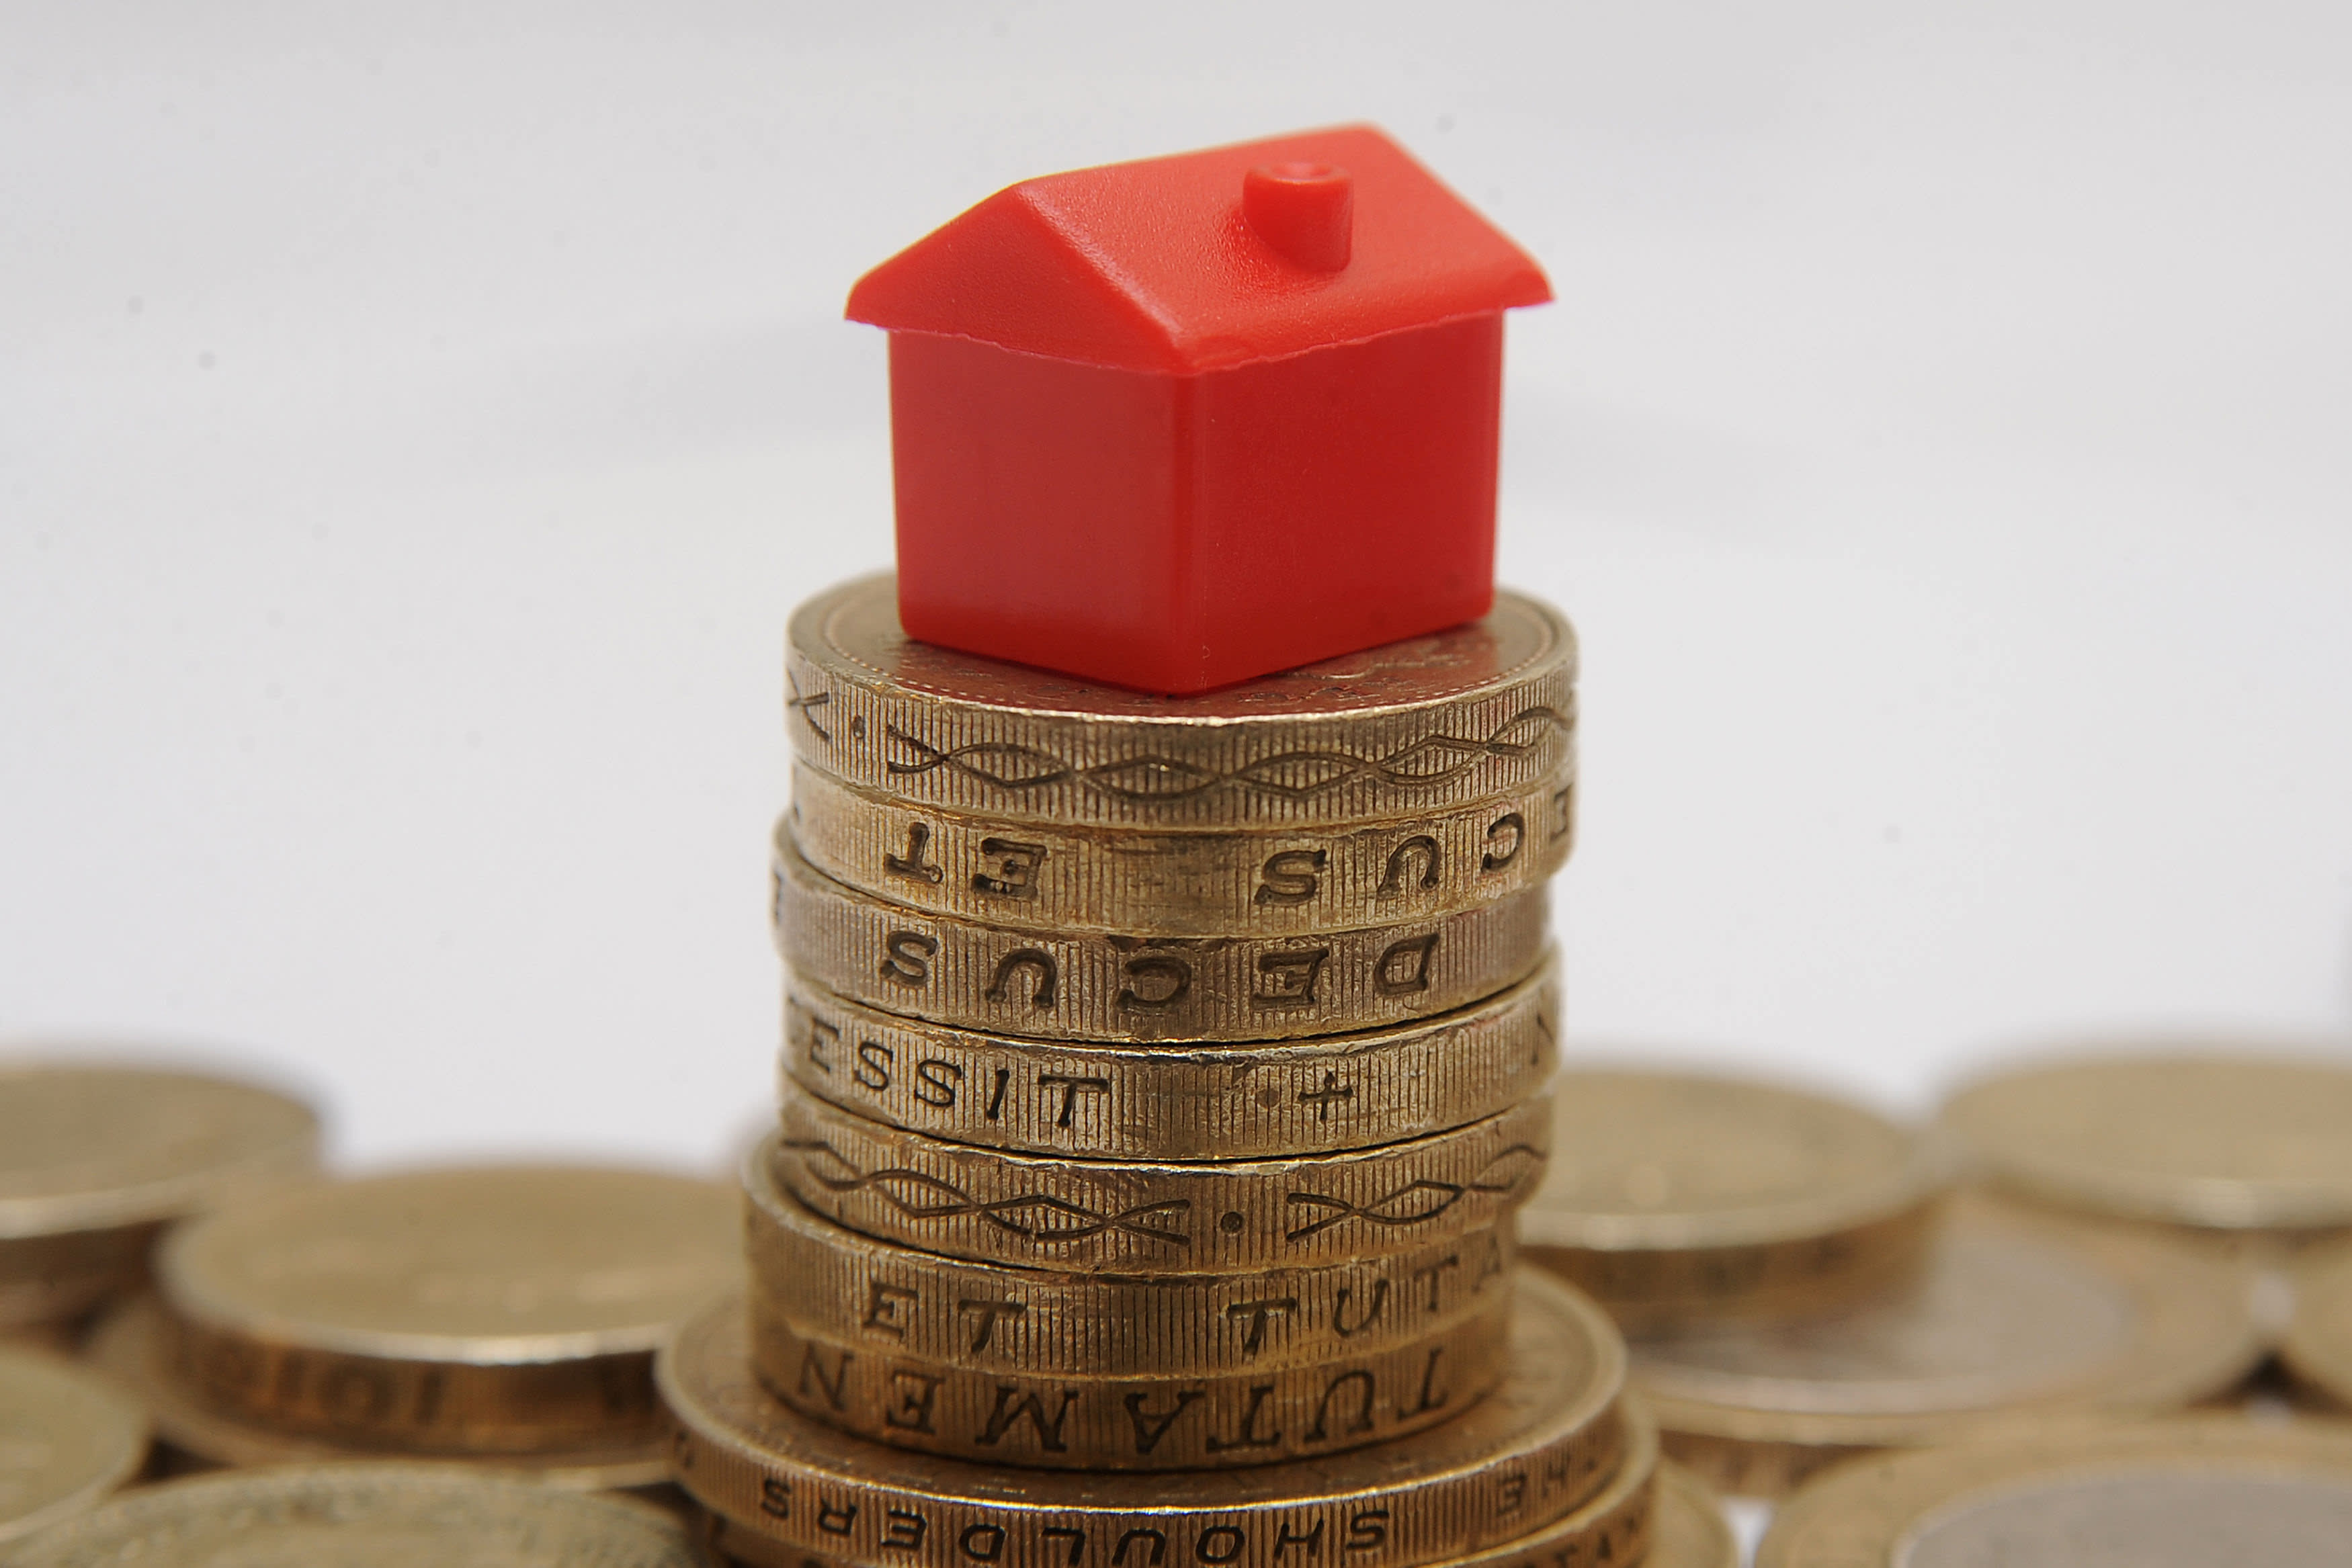 Shared-ownership mortgages: Niche but on the increase